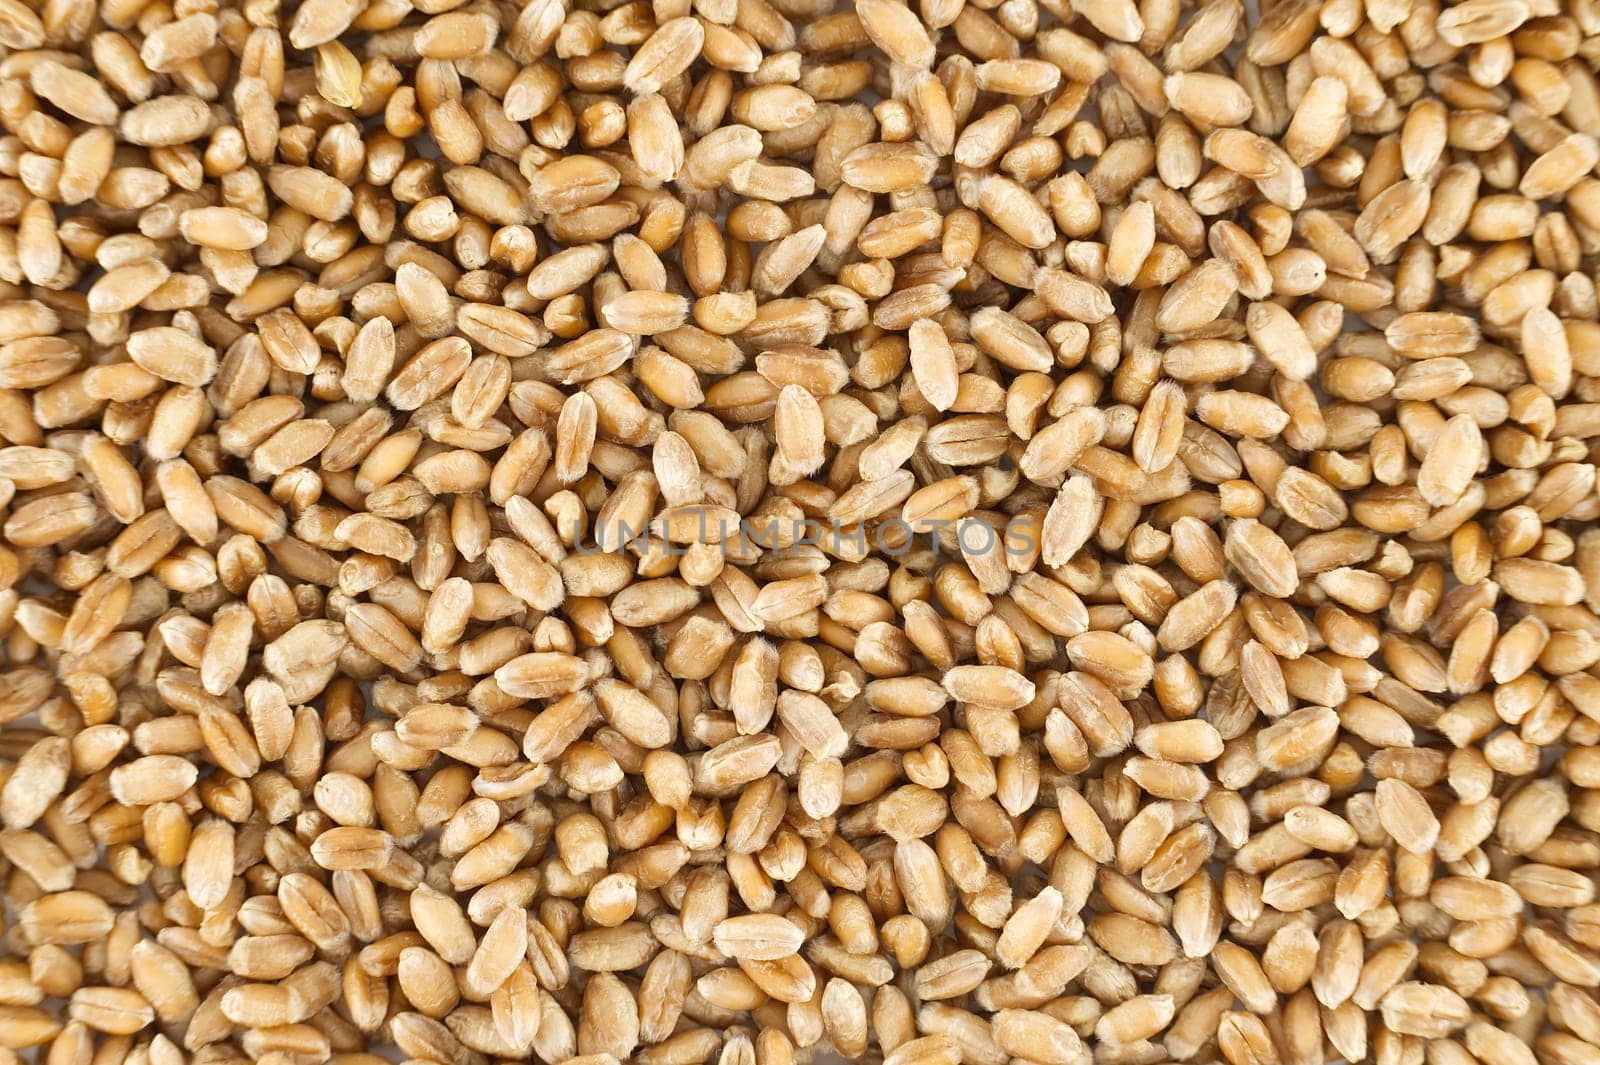 Detailed close-up image of wheat grains perfect for natural food, agriculture and organic farming concepts.